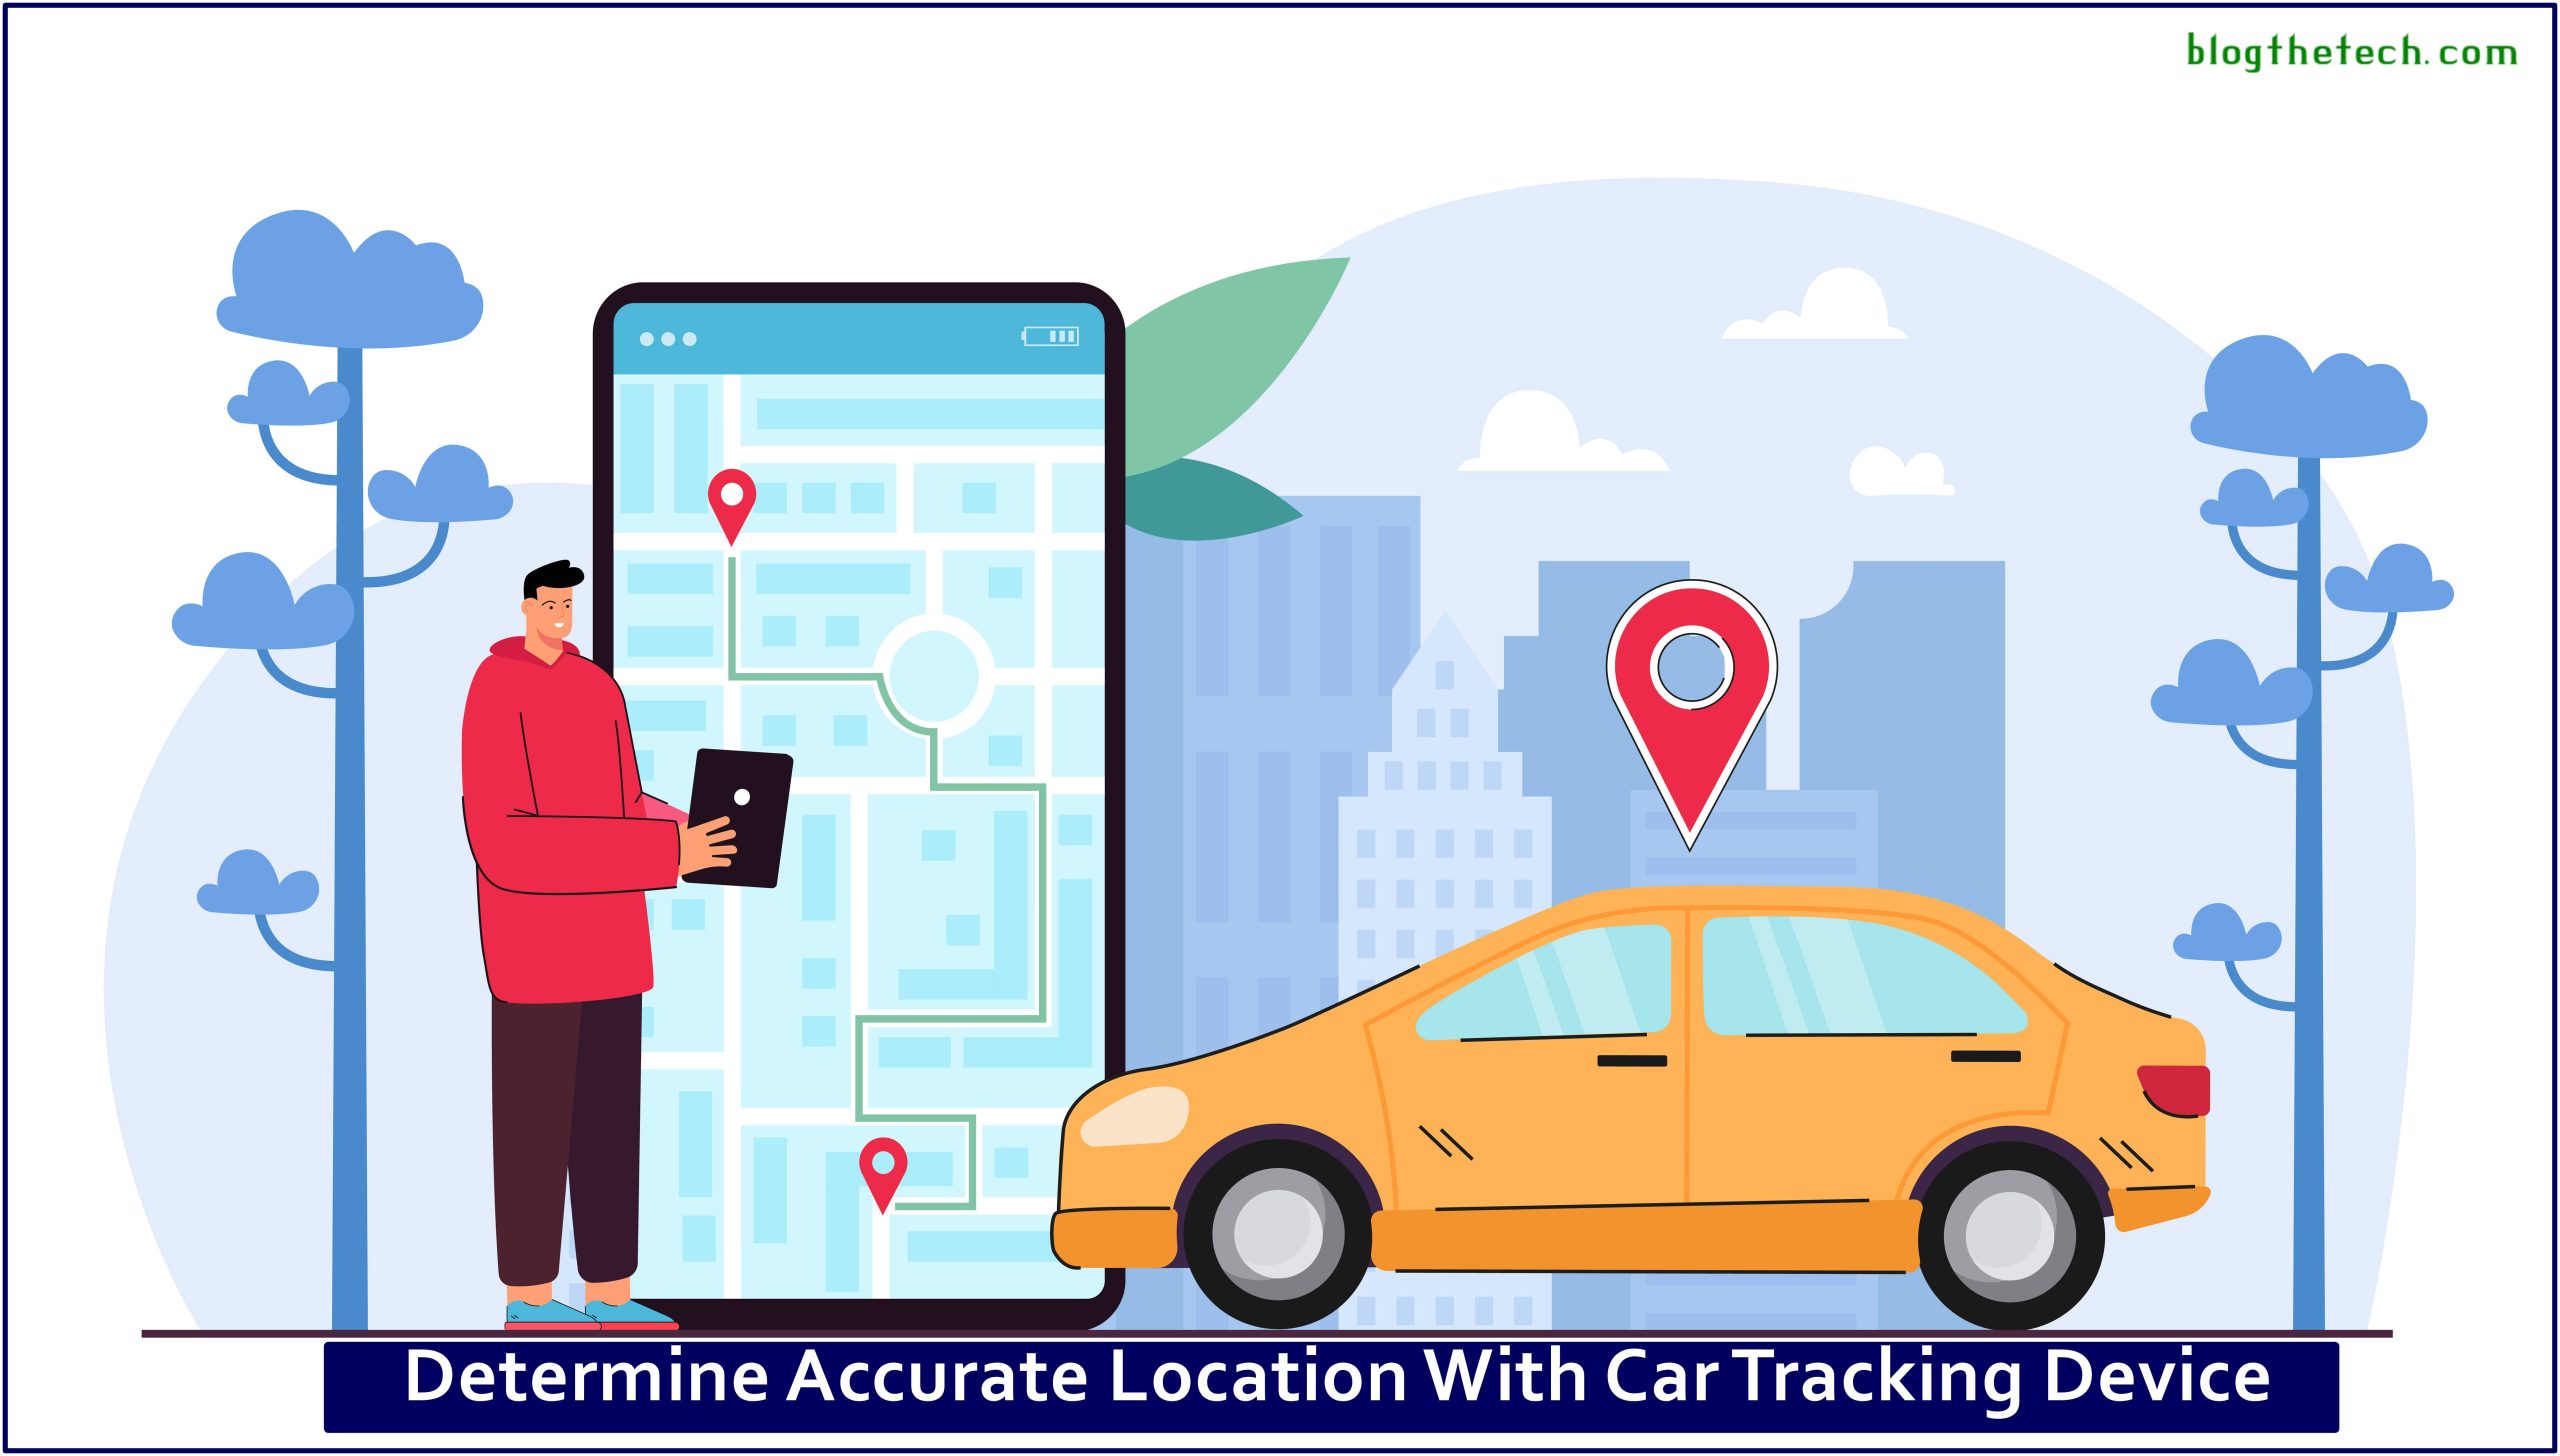 Determine Accurate Location With Car Tracking Device